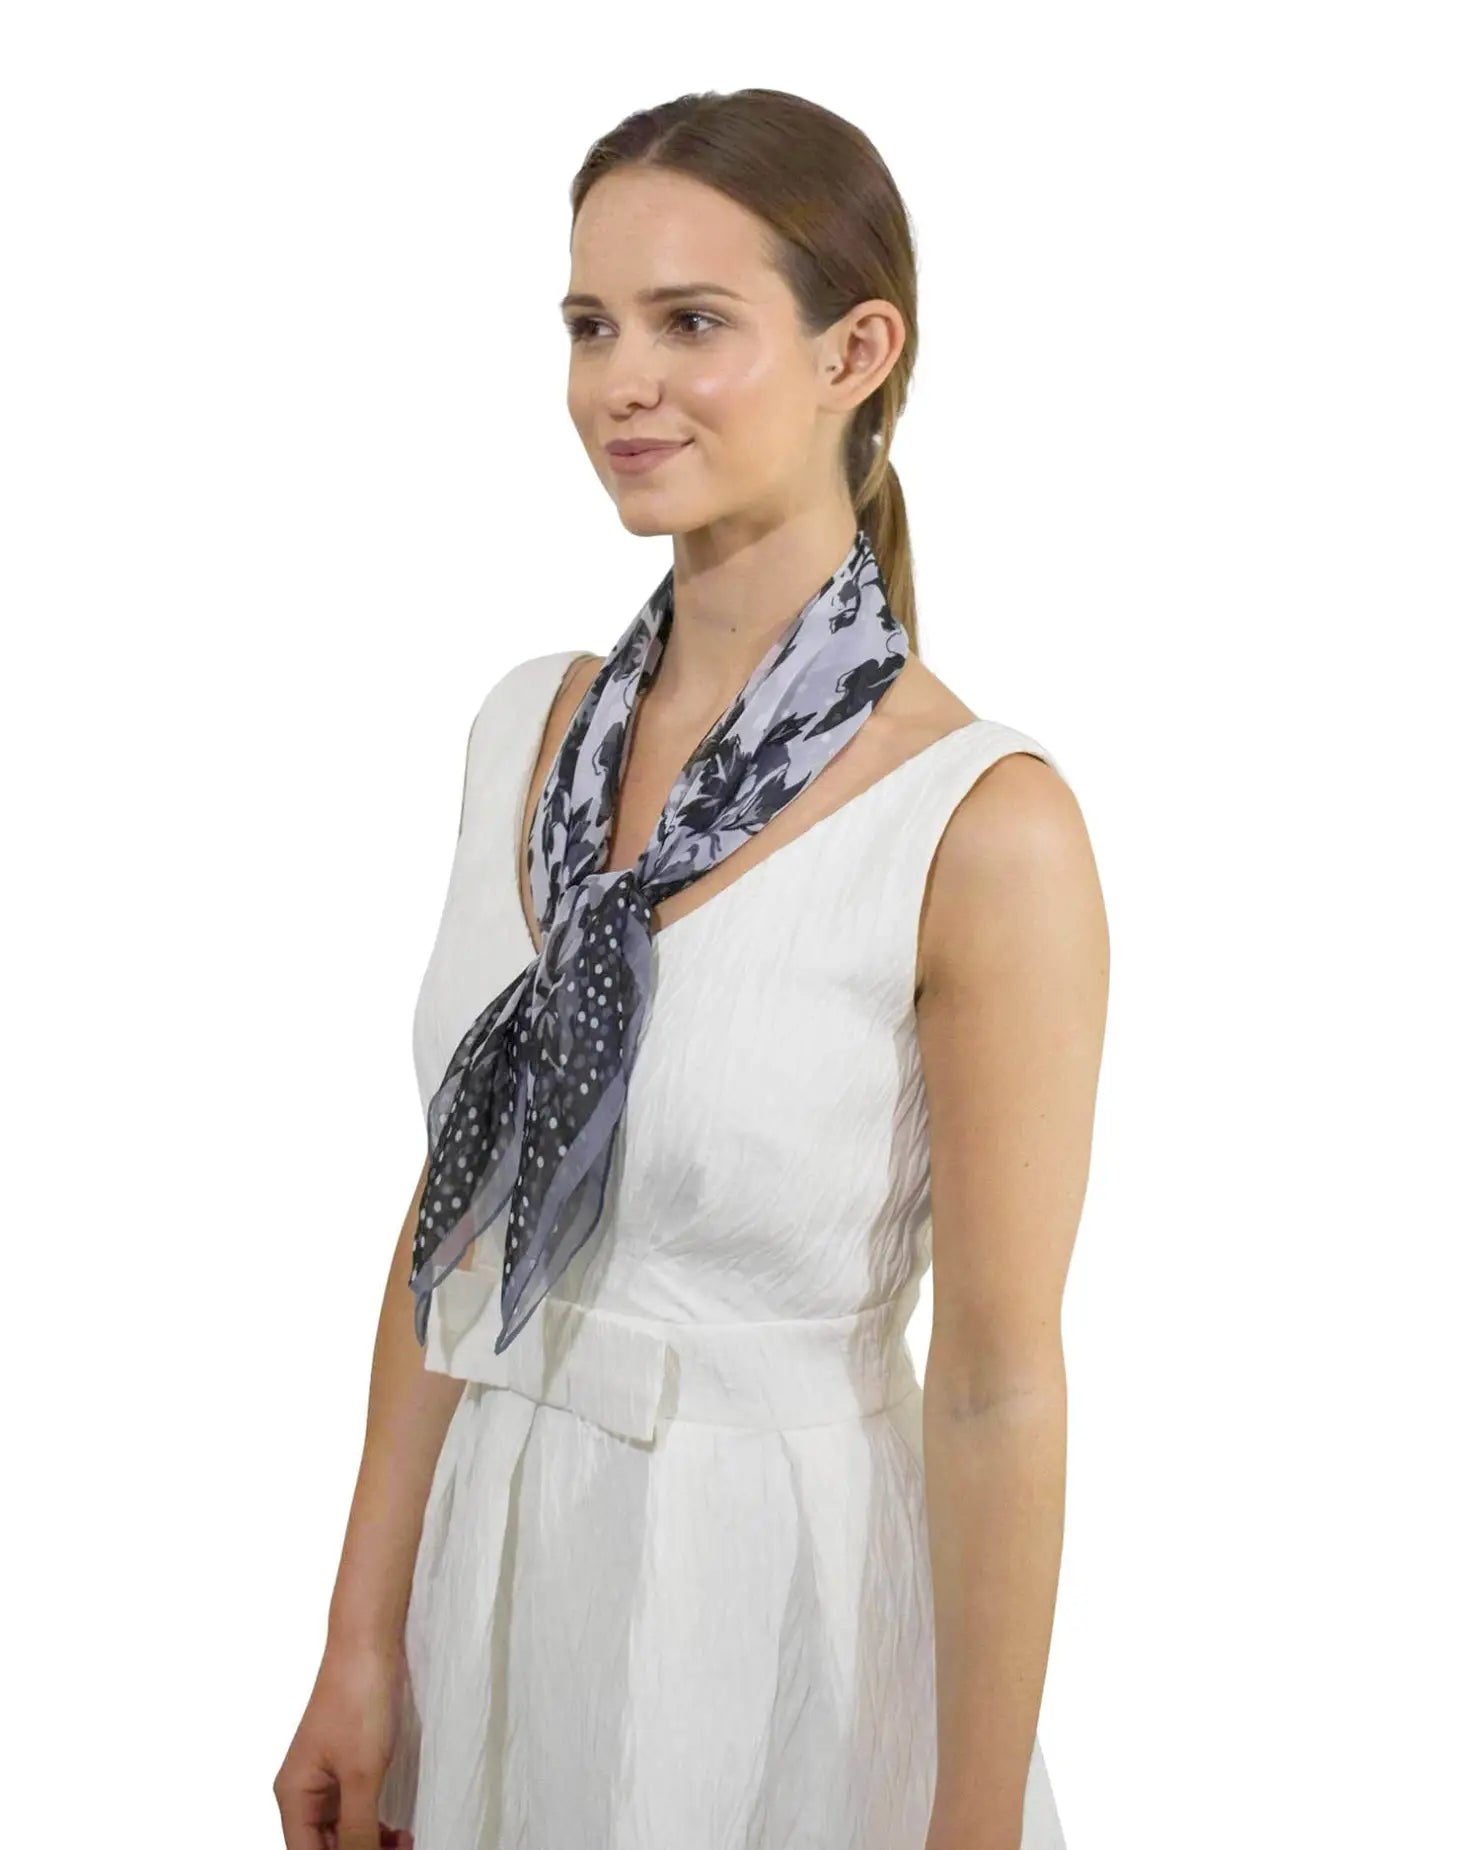 Woman wearing a white dress and blue scarf, showcasing Charming Polka Dot & Floral Small Square Scarf.